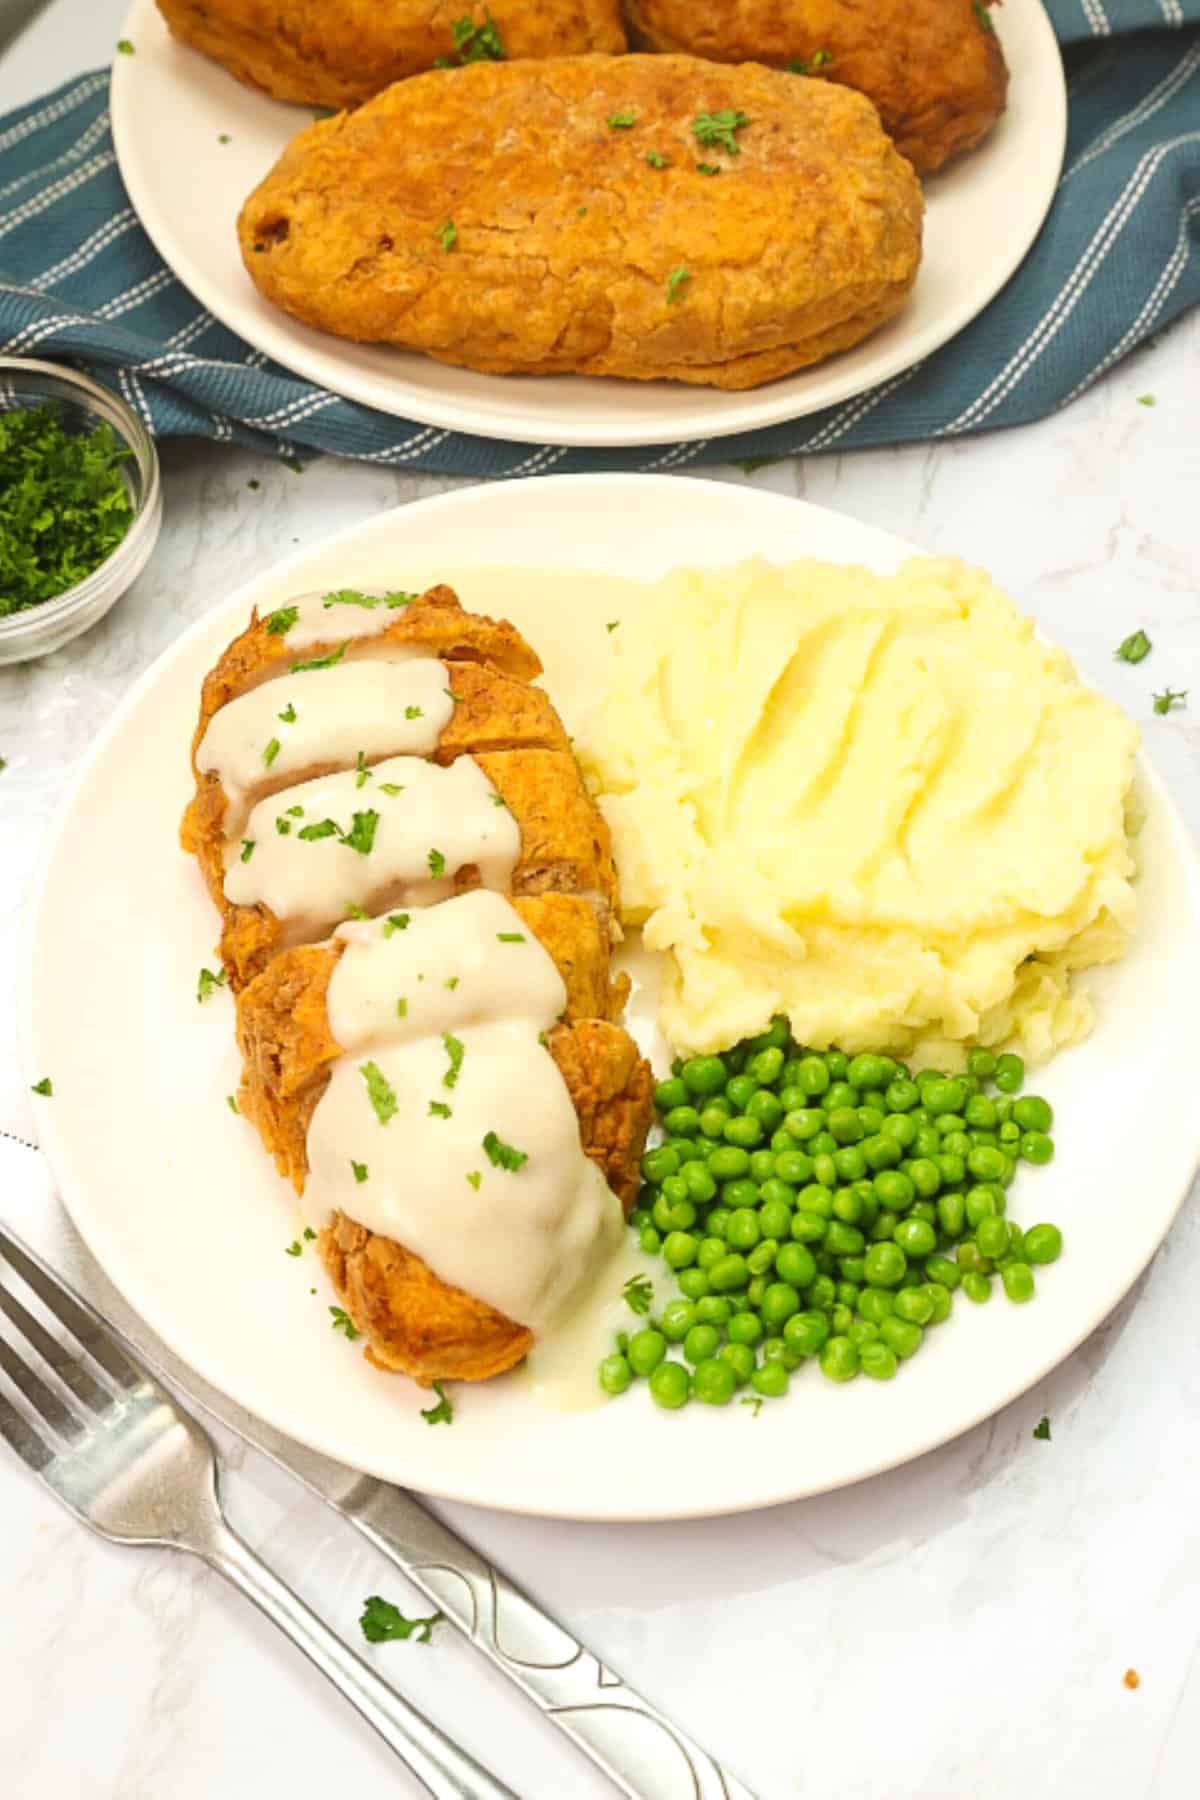 Enjoy pure comfort food of fried chicken breast, mashed potatoes and satisfying peas